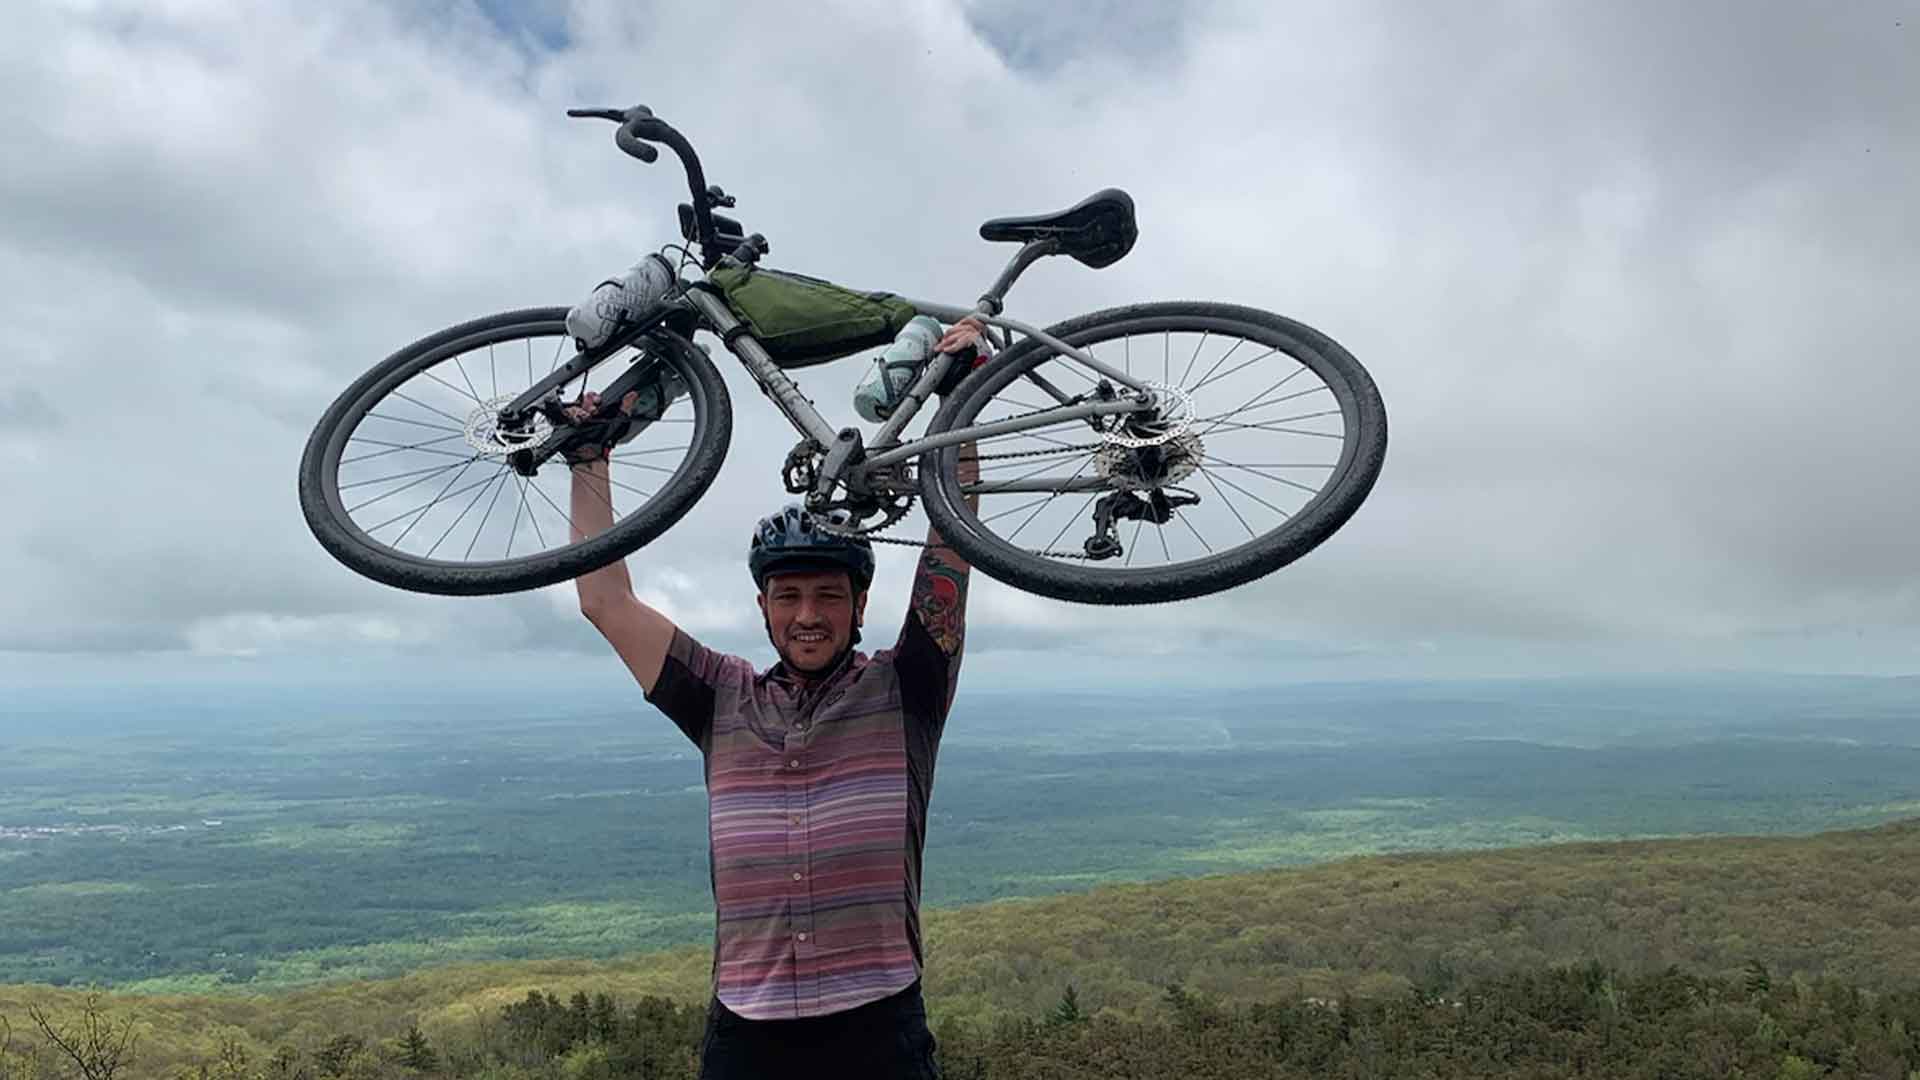 Danny lifts bike over his head in triumph while standing at the summit of a mountain